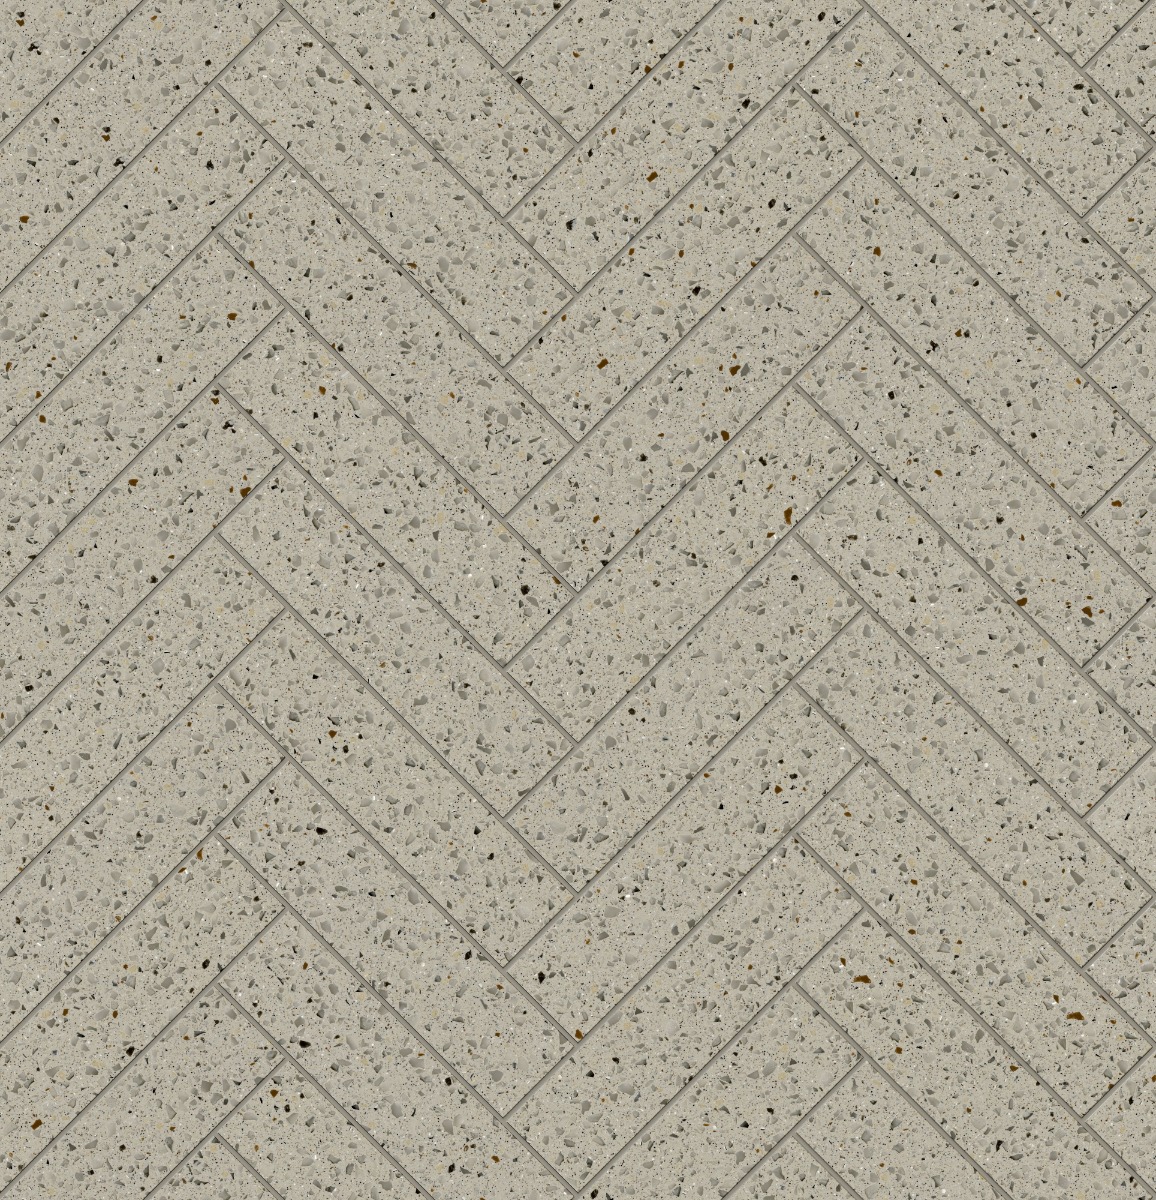 A seamless surfacing texture with gad-007 juno units arranged in a Herringbone pattern